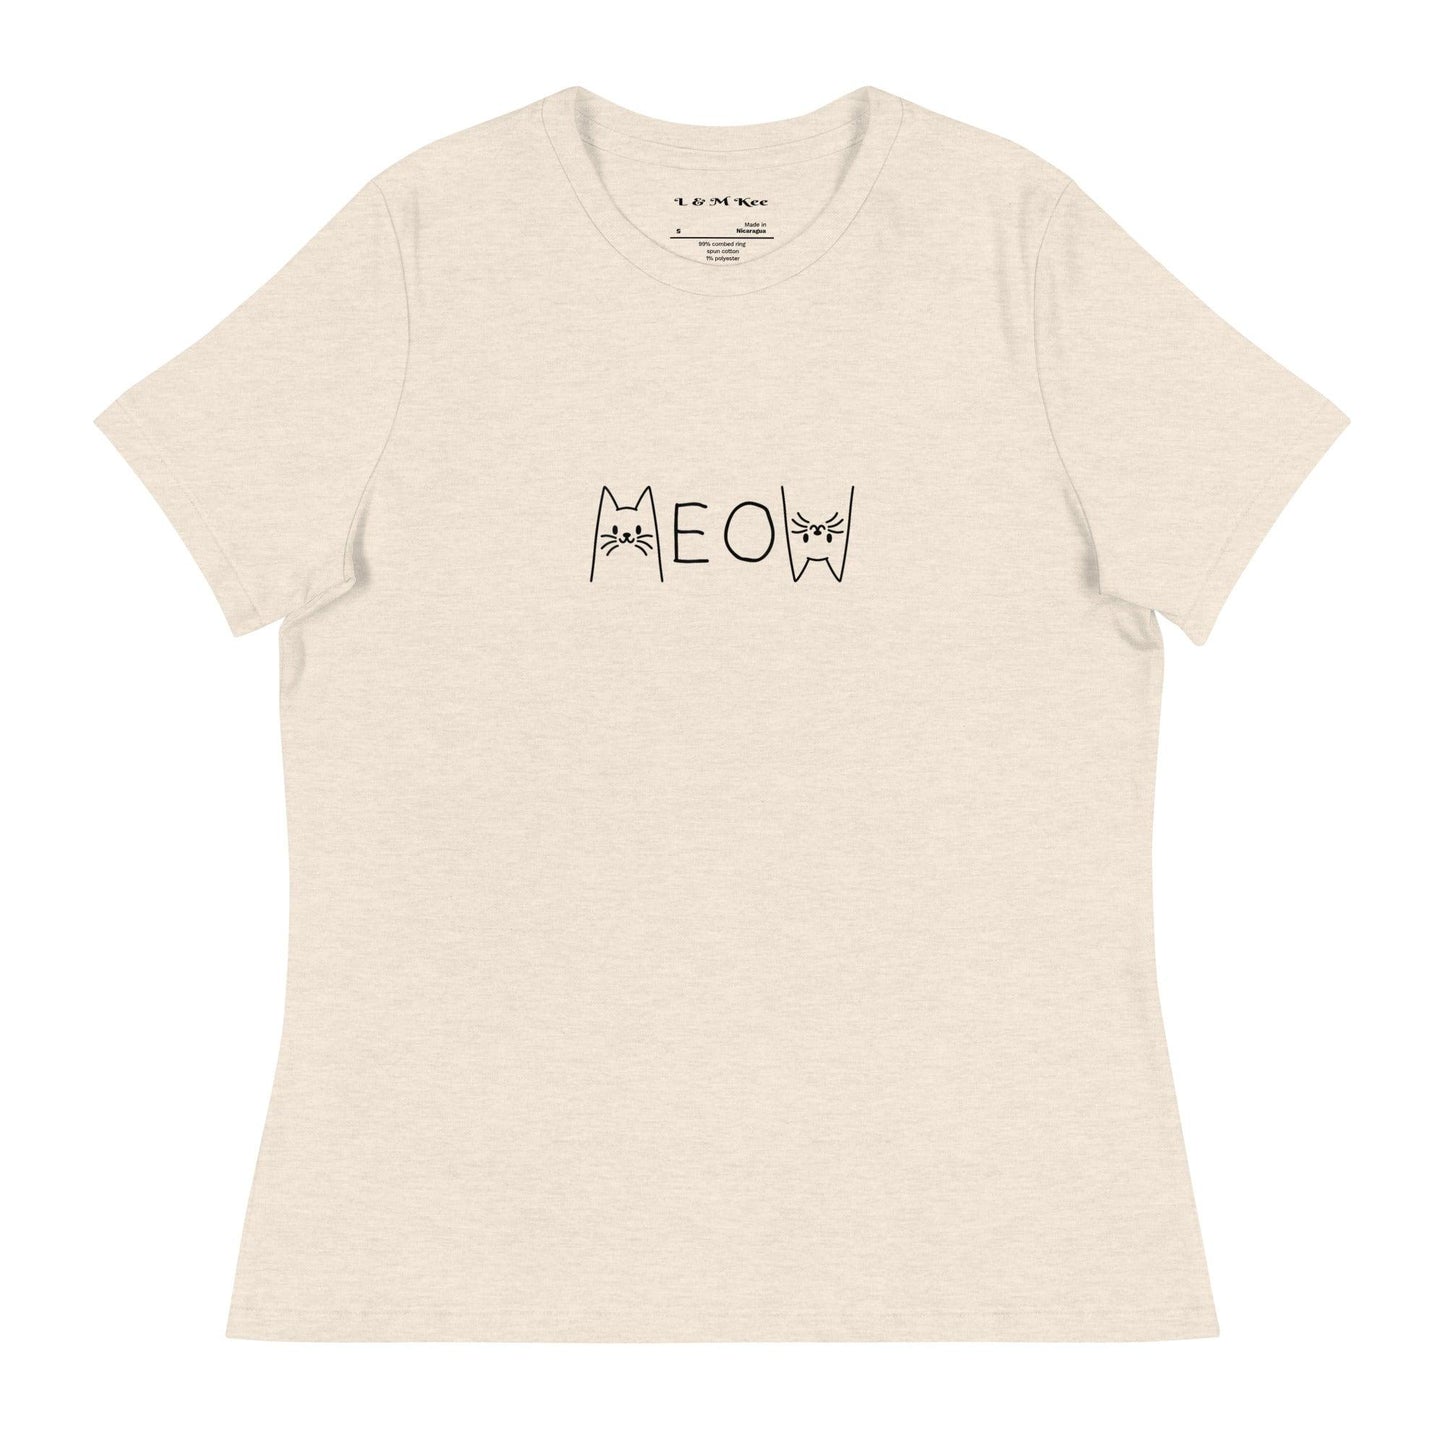 Meow Relaxed T-Shirt - L & M Kee, LLC